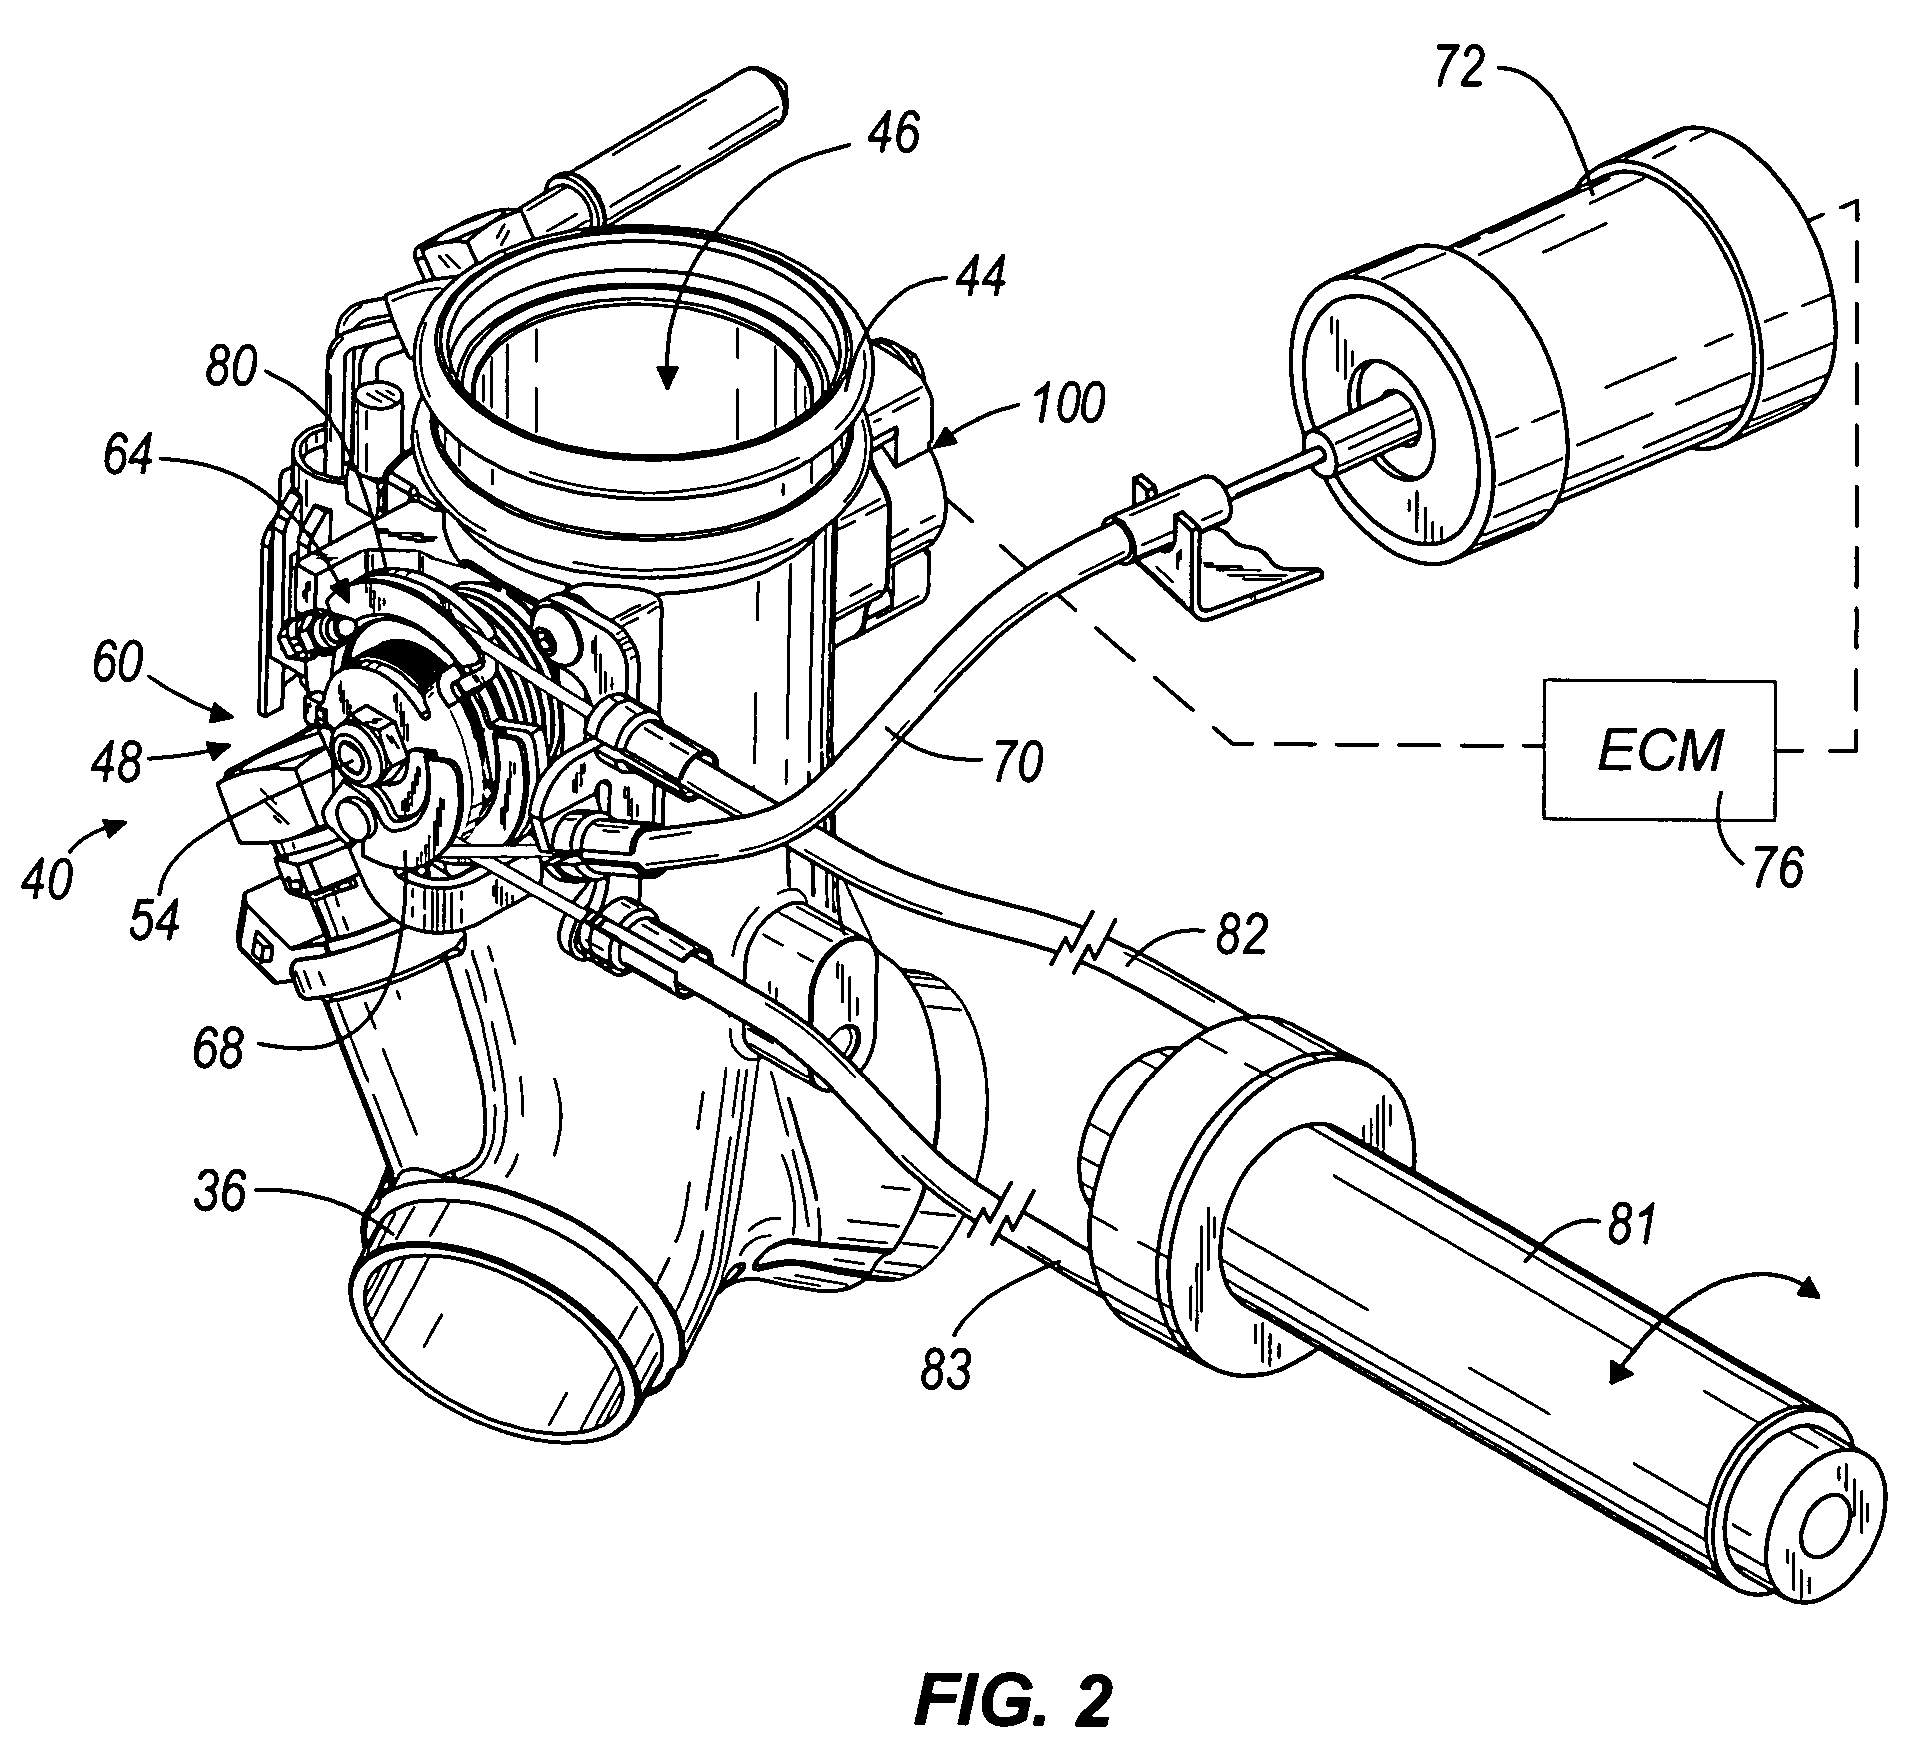 Power control device and method for a motorcycle